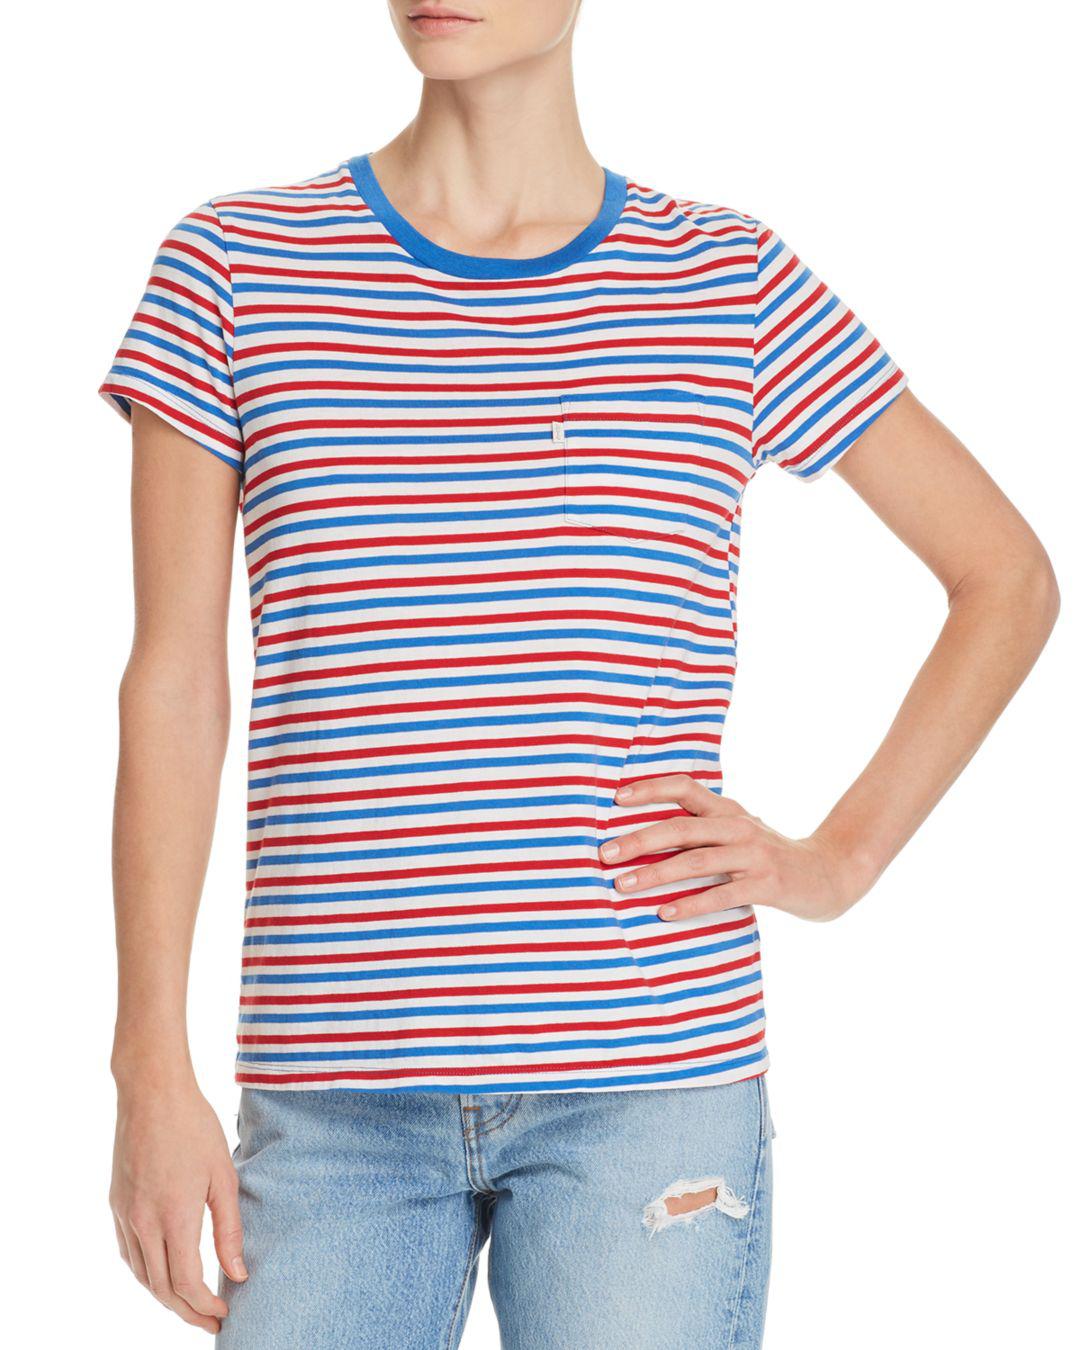 Levis Striped Top Flash Sales, 57% OFF | empow-her.com